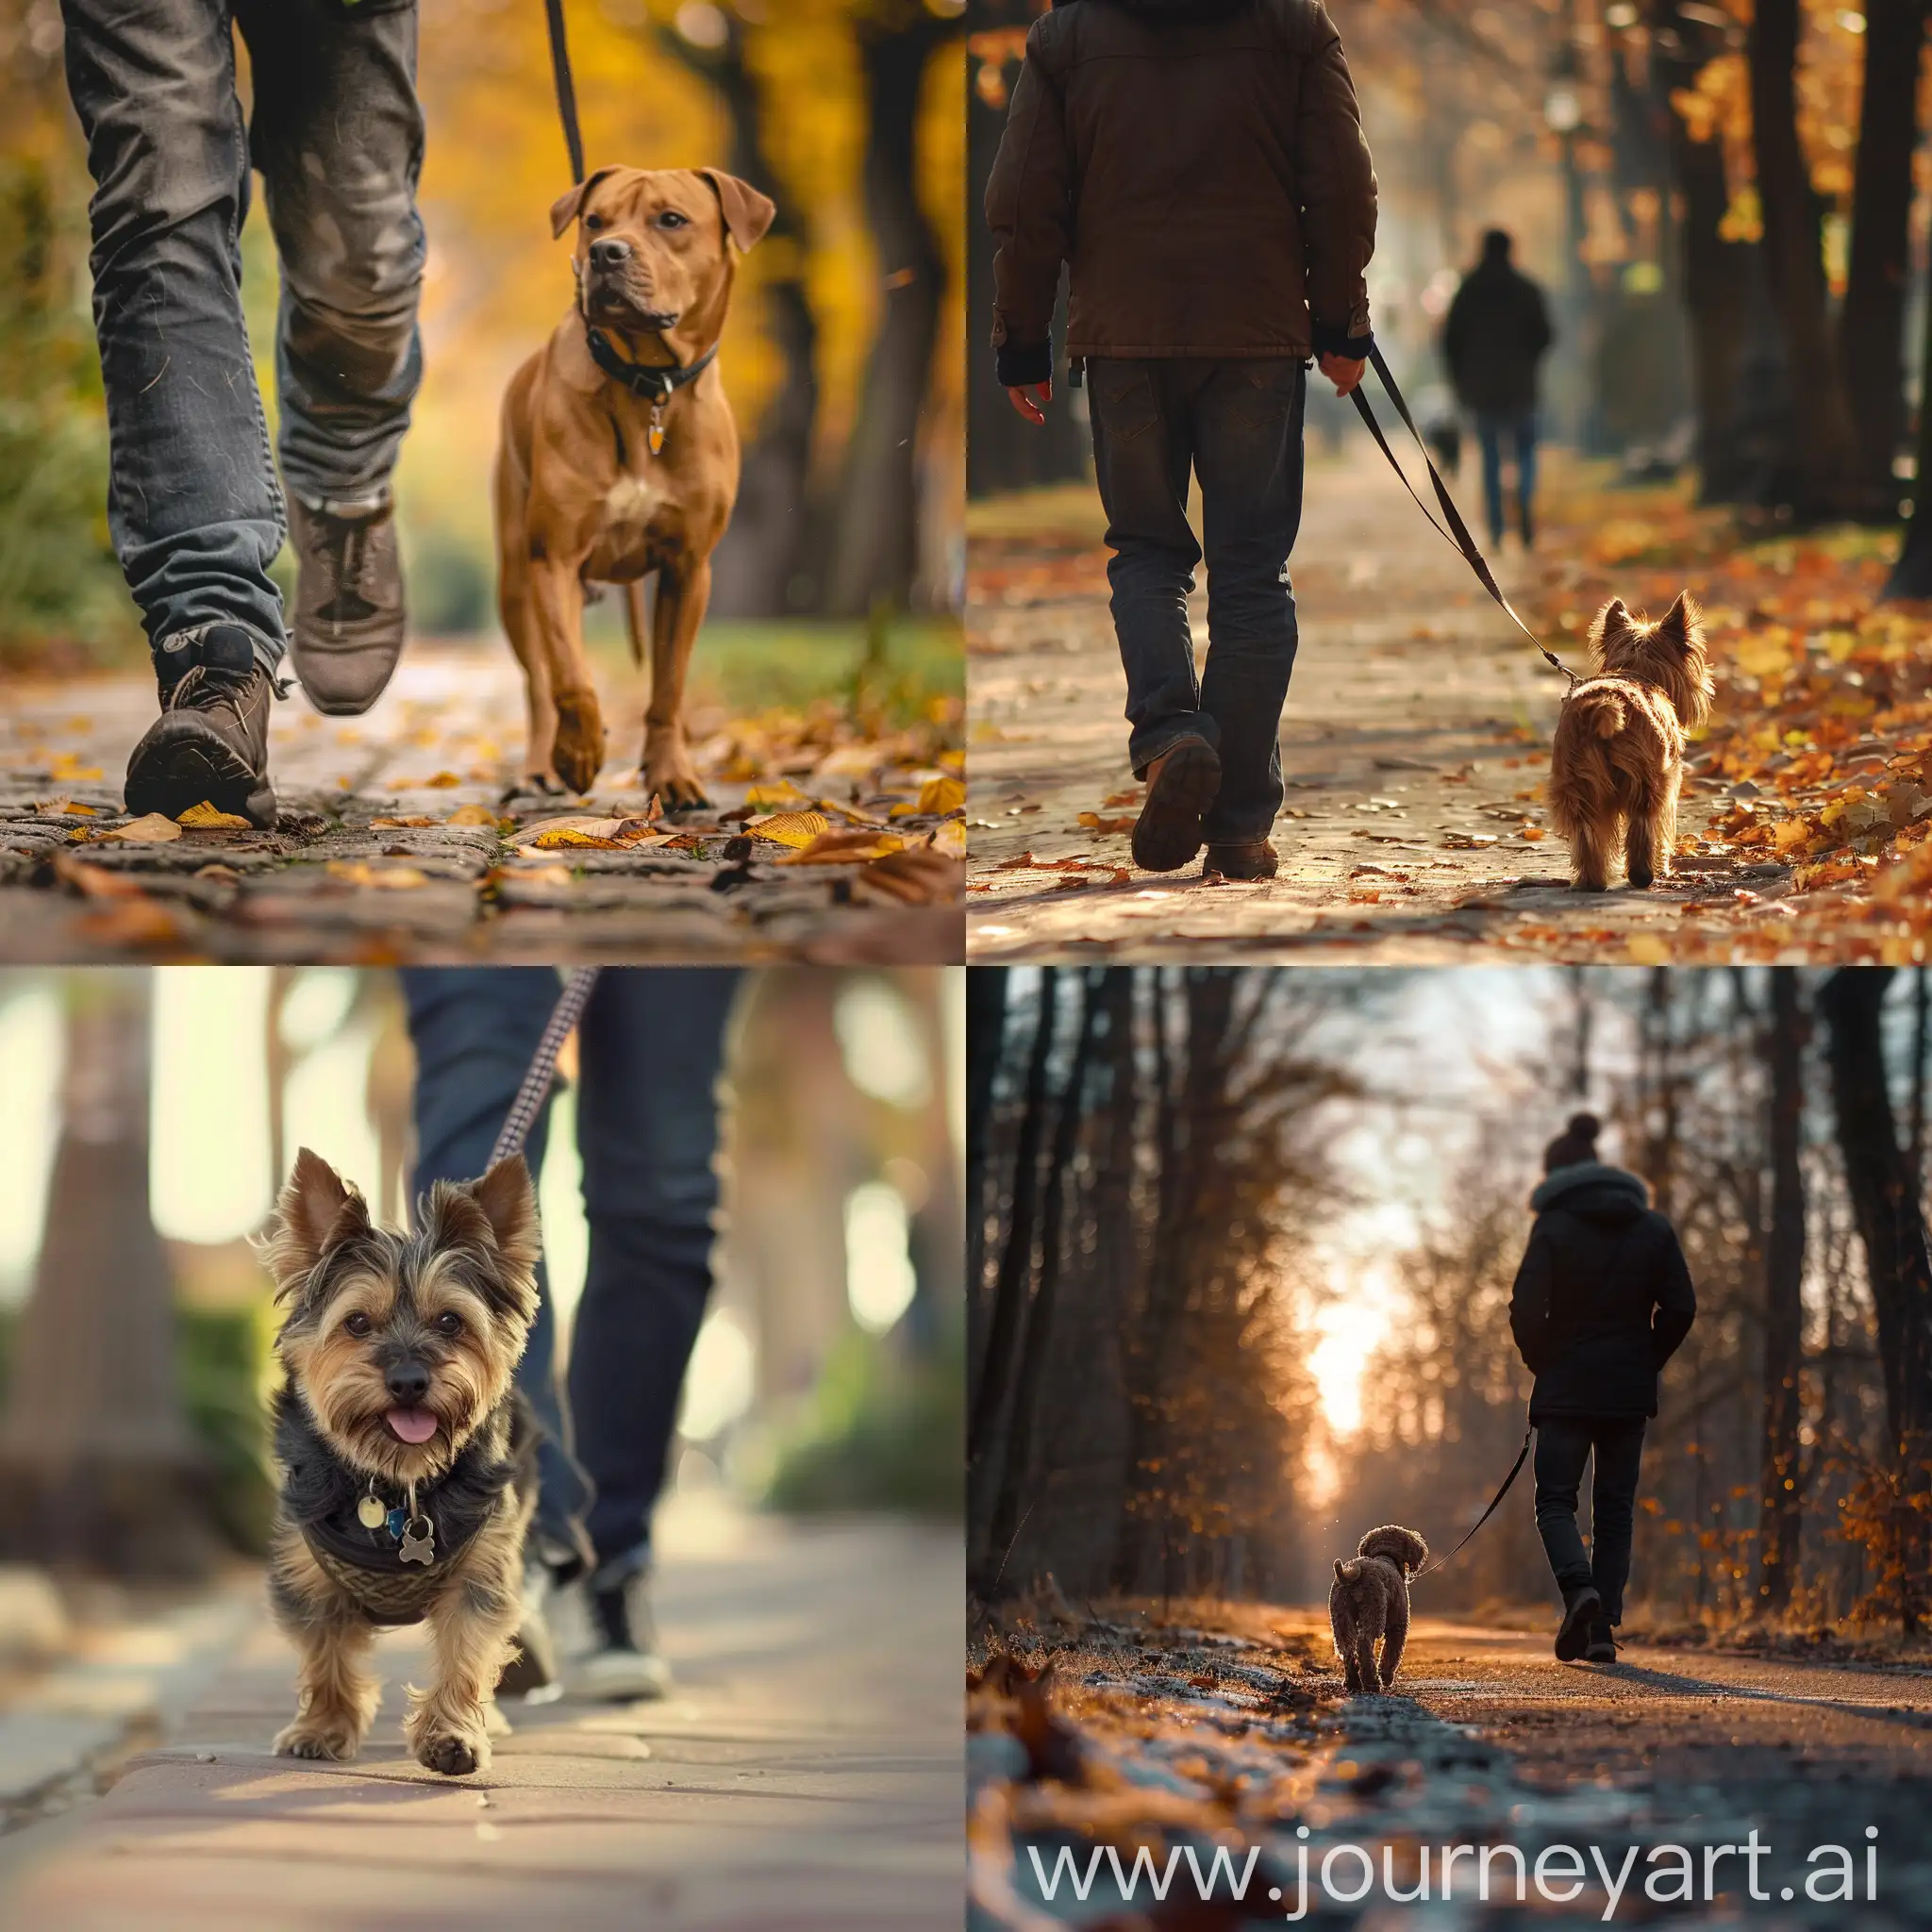 Walking-the-Dog-in-a-Vibrant-Urban-Setting